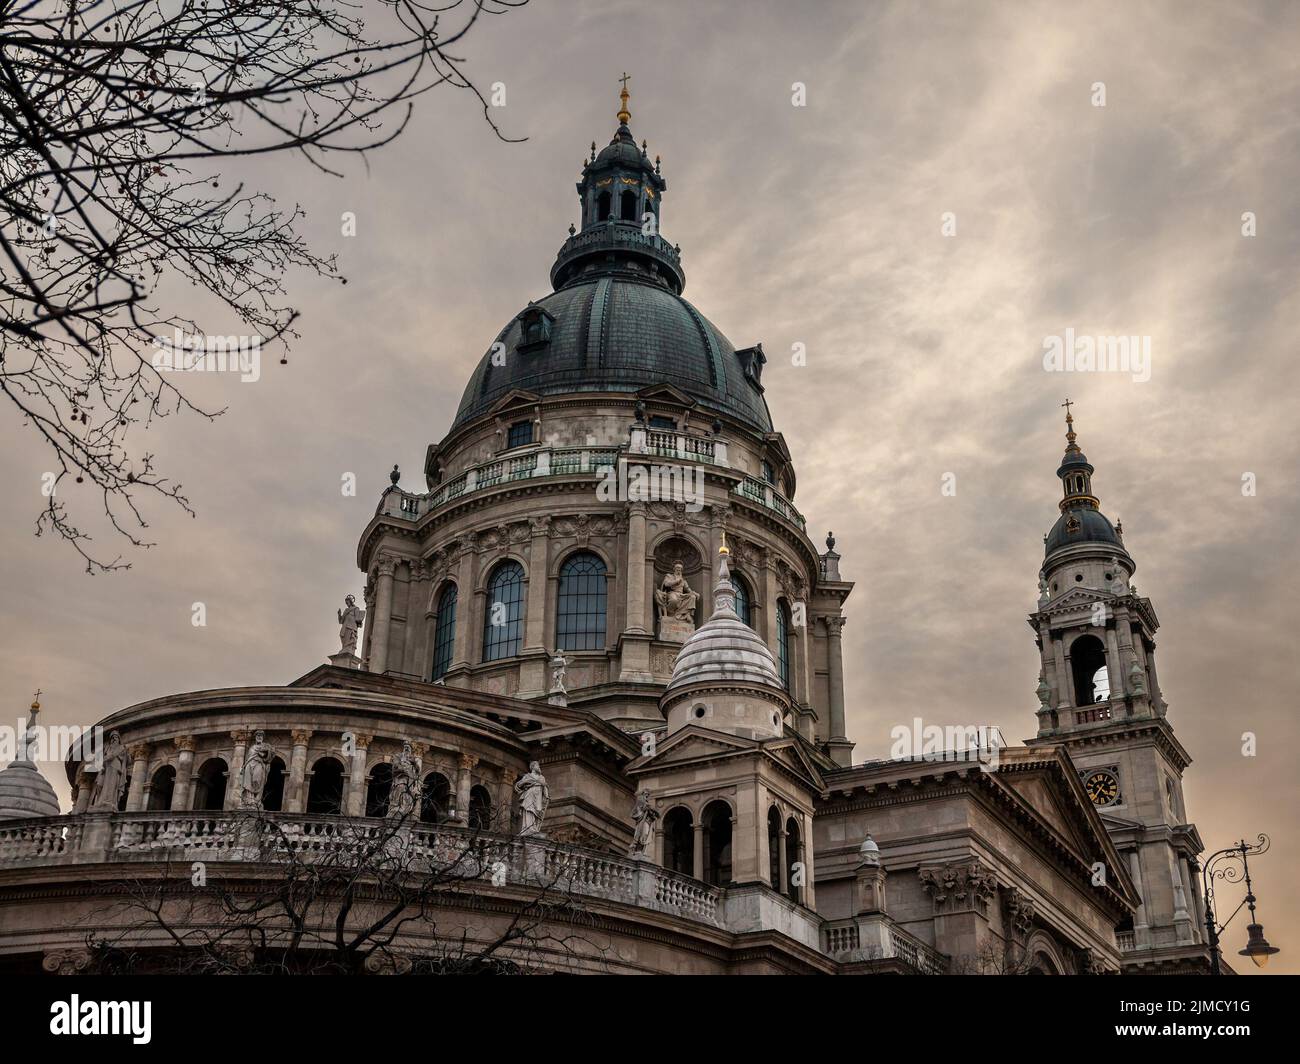 Picture of the back side of the Szent Istvan basilica Church in the city center of Budapest, Hungary. St. Stephen's Basilica is a Roman Catholic basil Stock Photo